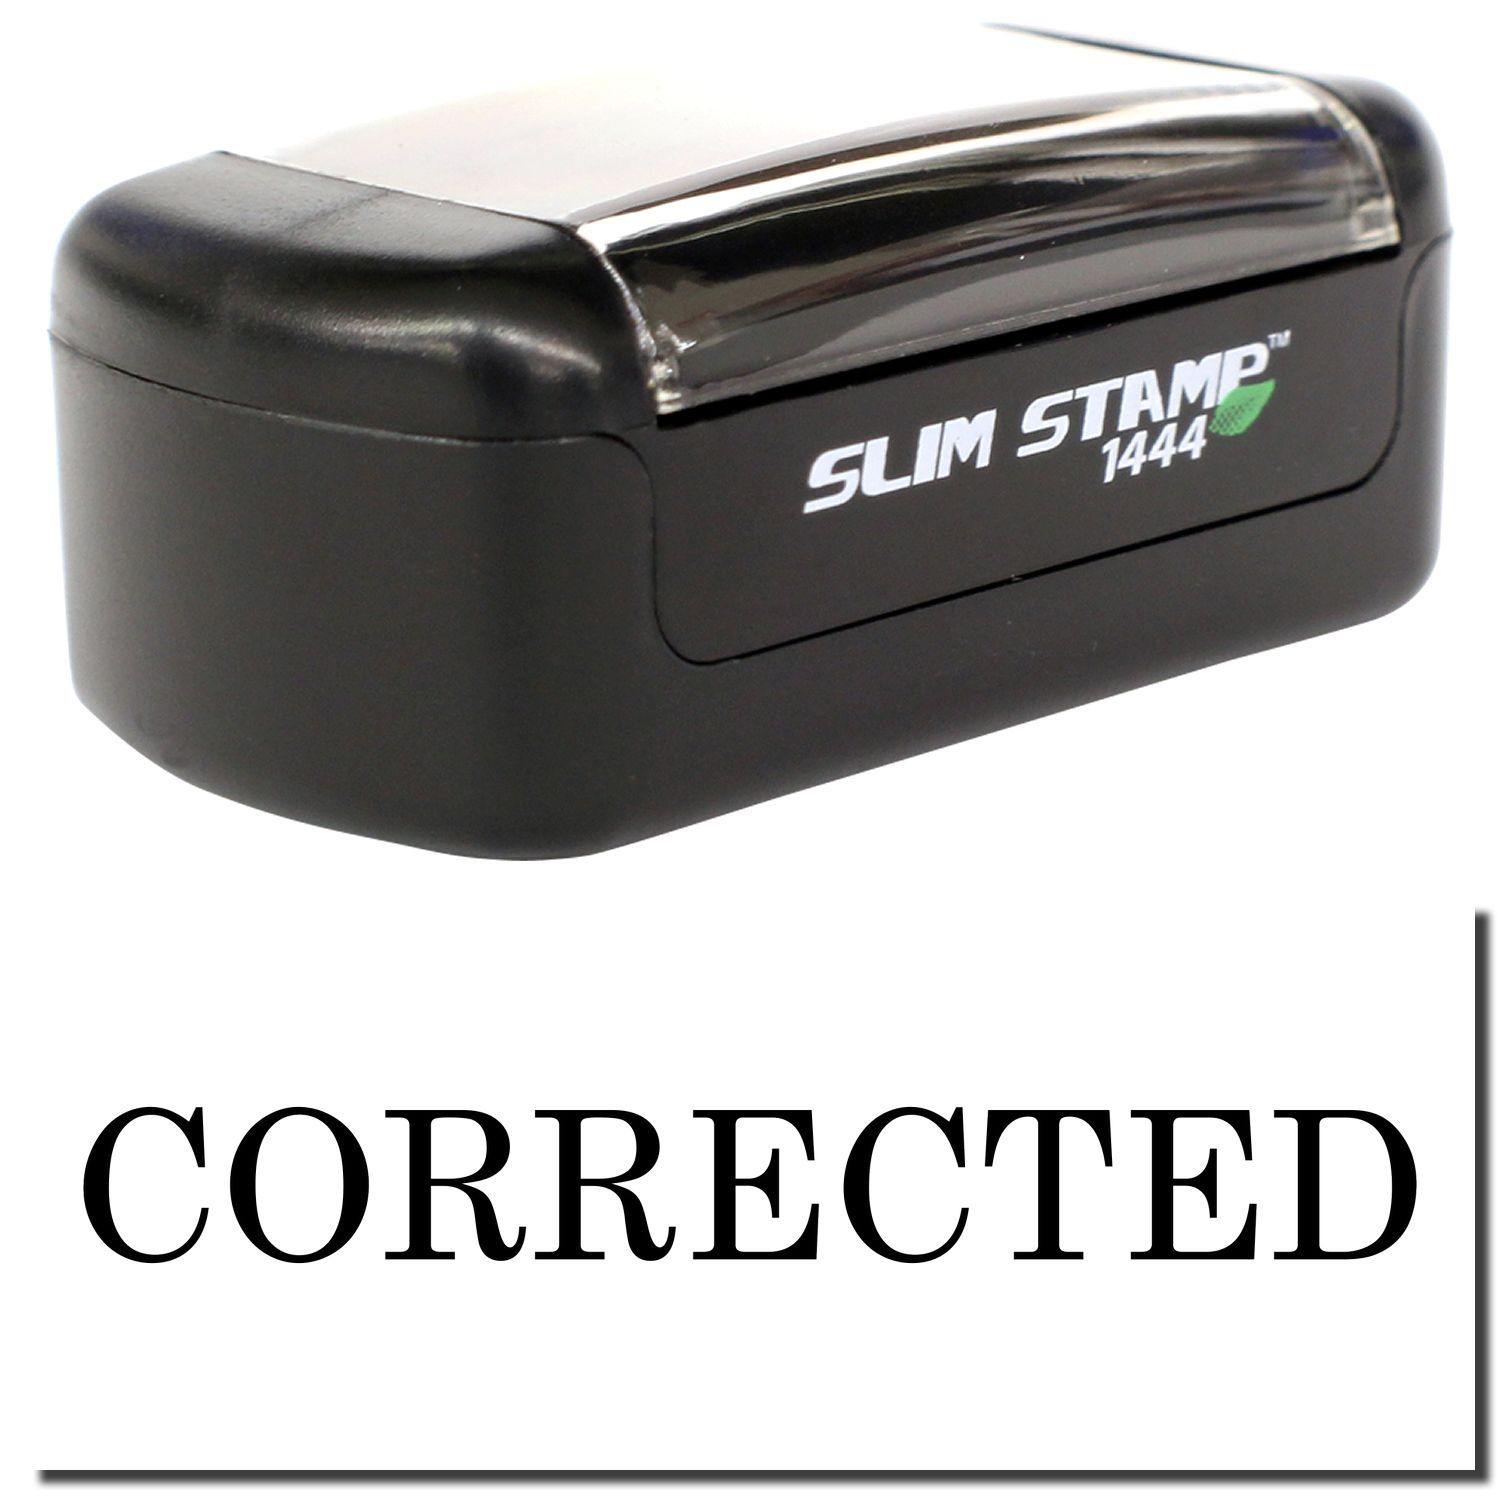 A stock office pre-inked stamp with a stamped image showing how the text "CORRECTED" is displayed after stamping.